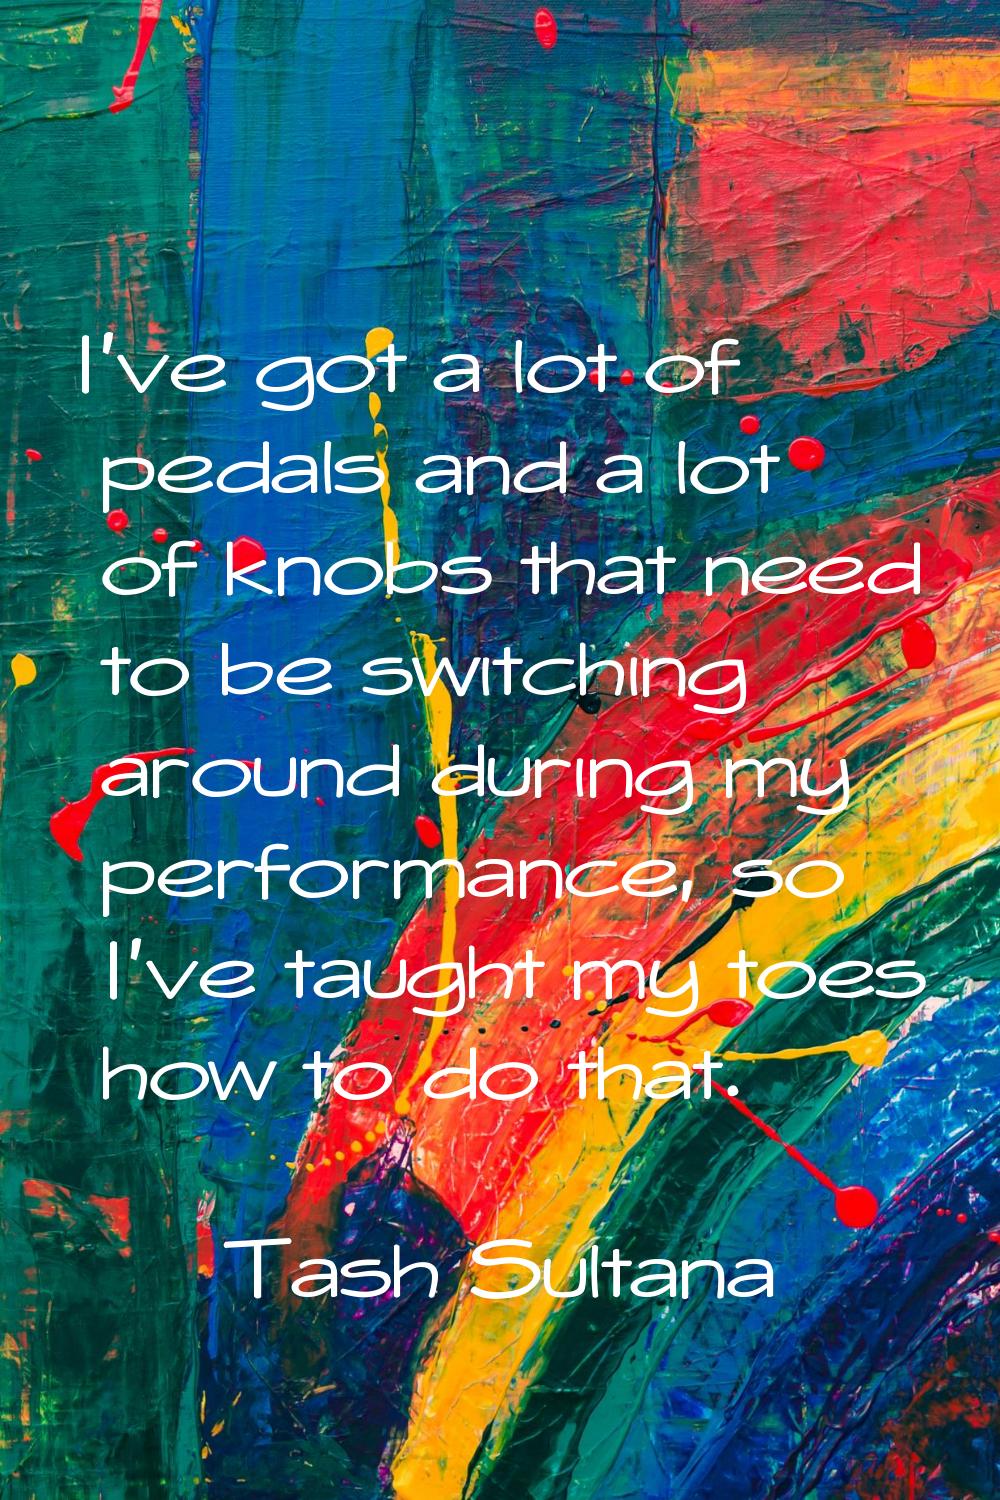 I've got a lot of pedals and a lot of knobs that need to be switching around during my performance,